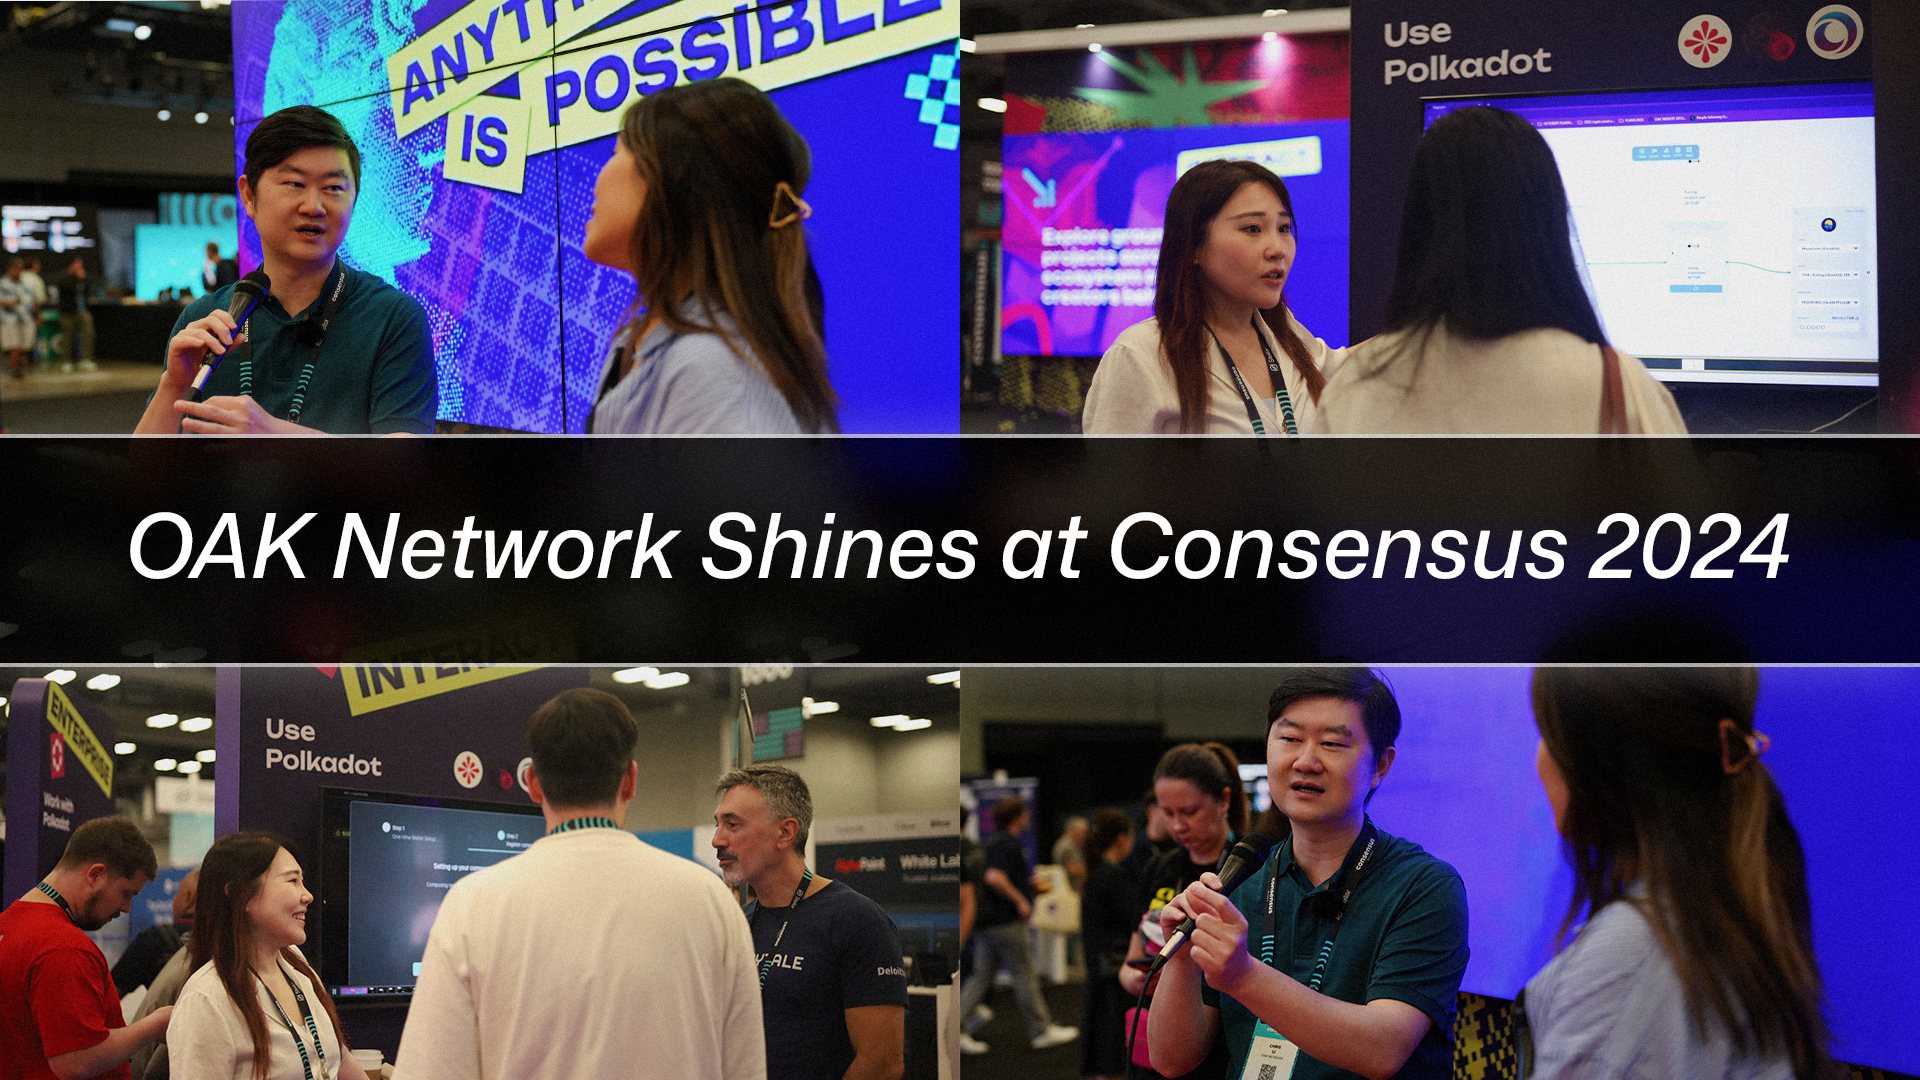 Composite image of OAK Network's participation at Consensus 2024. A banner headline reads, 'OAK Network Shines at Consensus 2024.' Chris Li, founder and CEO of OAK Network, appears speaking with an interviewer against a vibrant backdrop that reads 'Anything is Possible.' Other images show an OAK Network representative explaining the protocol's technology to an attendee in front of a Polkadot display, and attendees engaged in a discussion about OAK Network at the Polkadot booth.